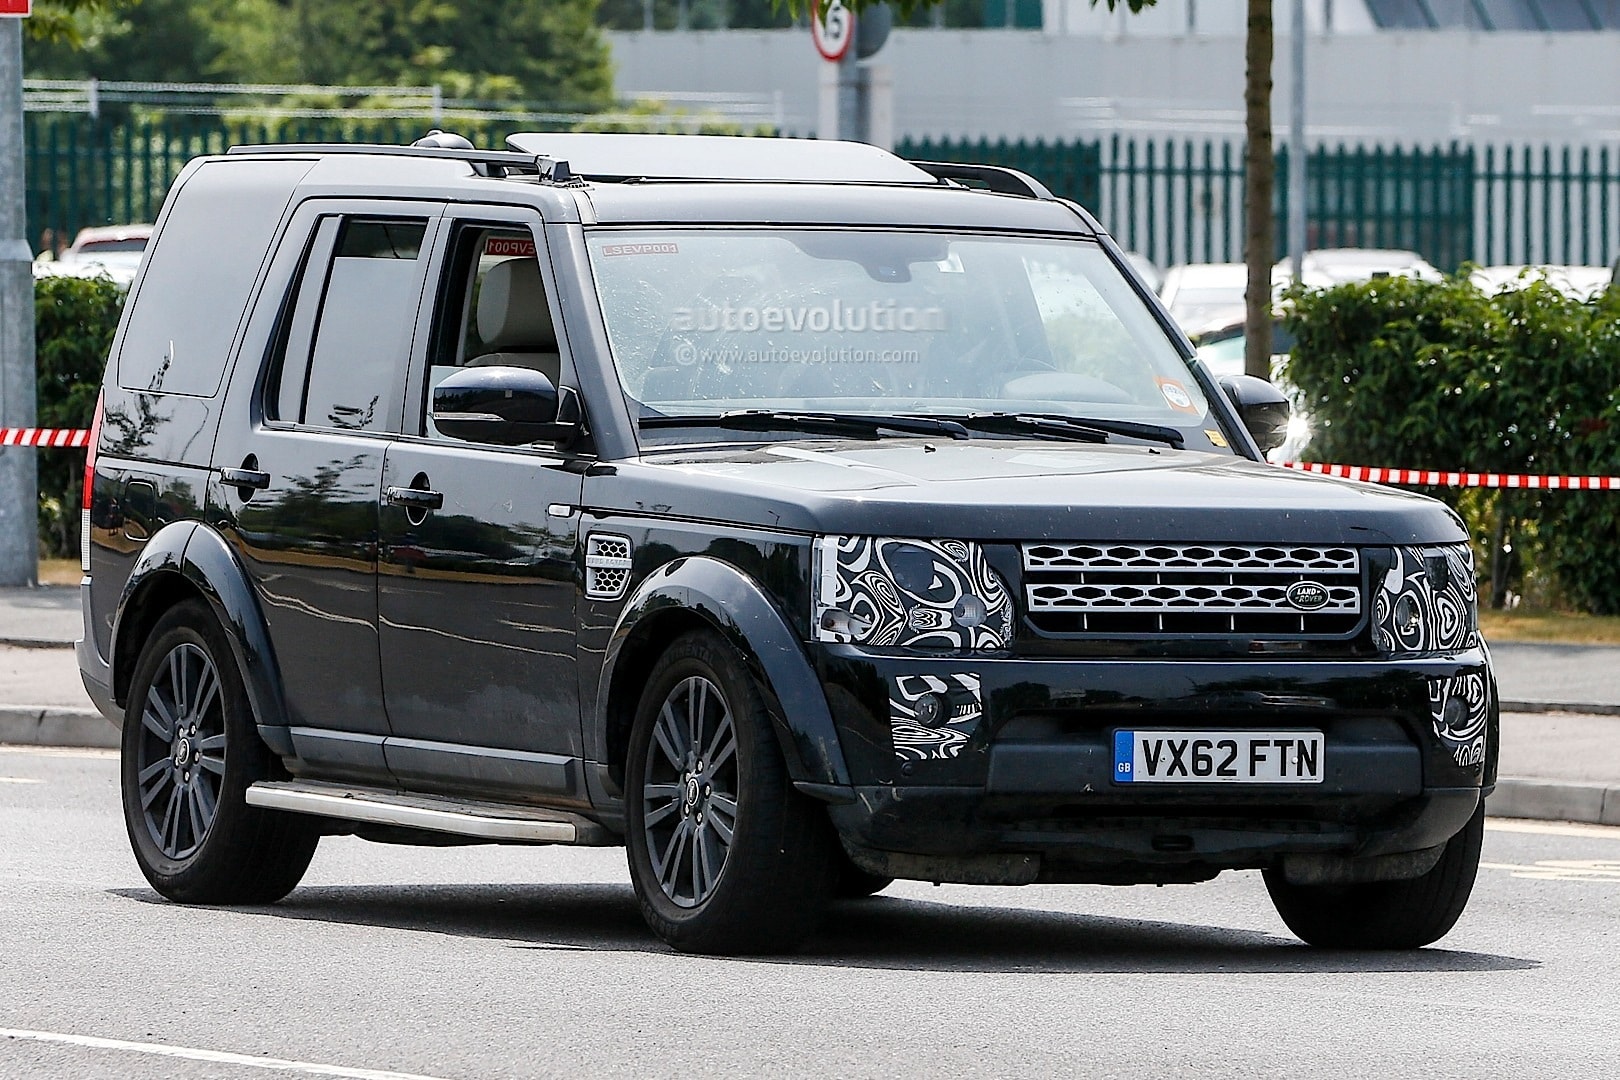 Spyshots: 2014 Land Rover Discovery Facelift - autoevolution